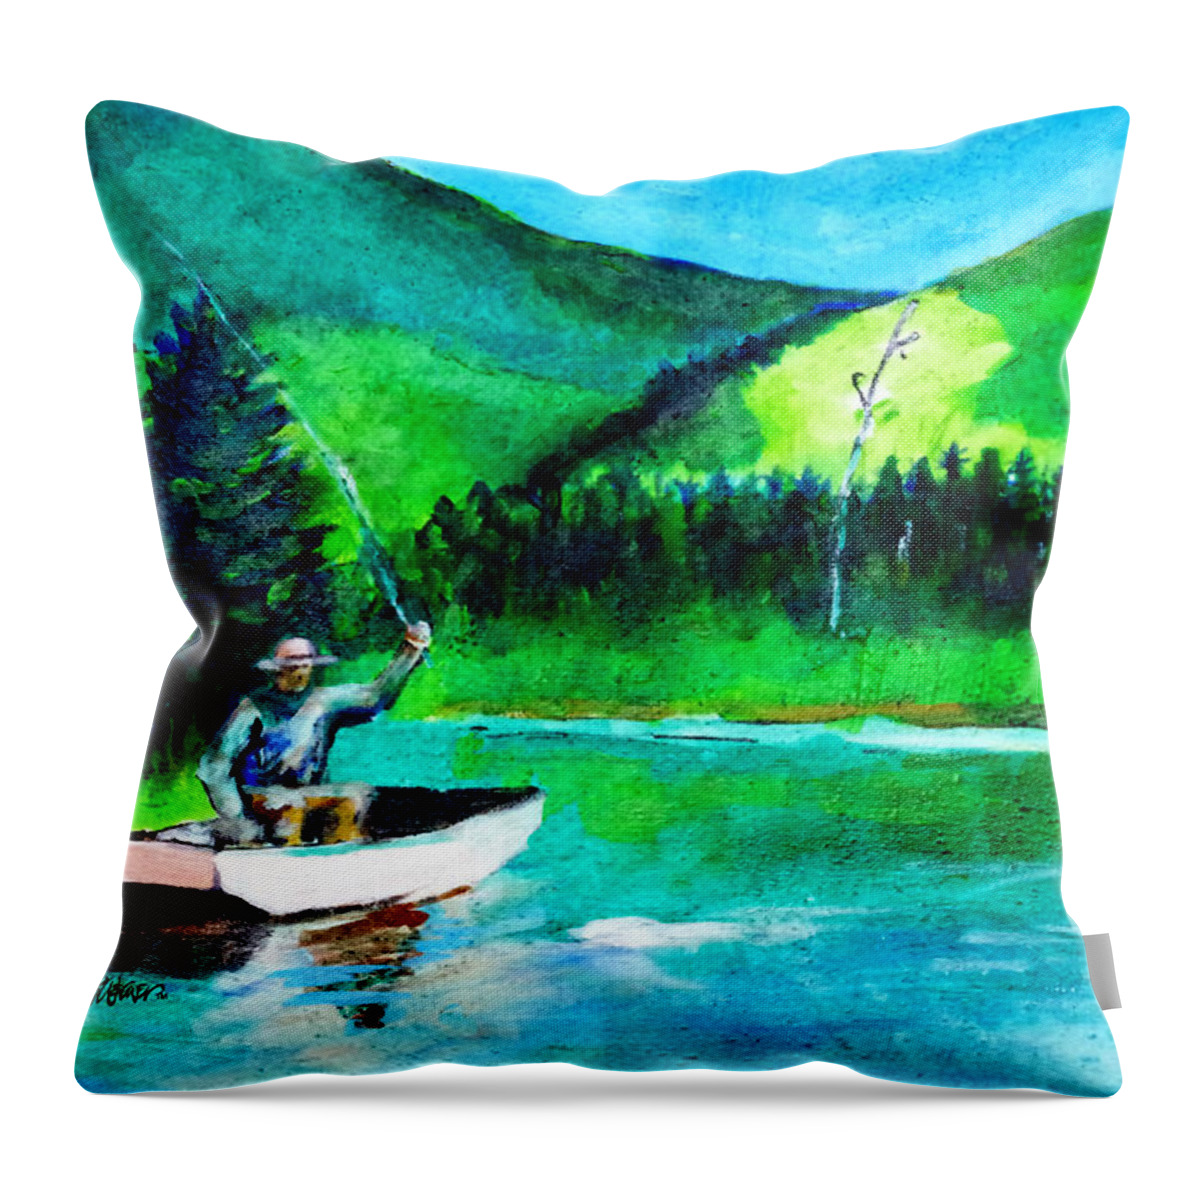 The First Cast Throw Pillow featuring the painting The First Cast by Seth Weaver